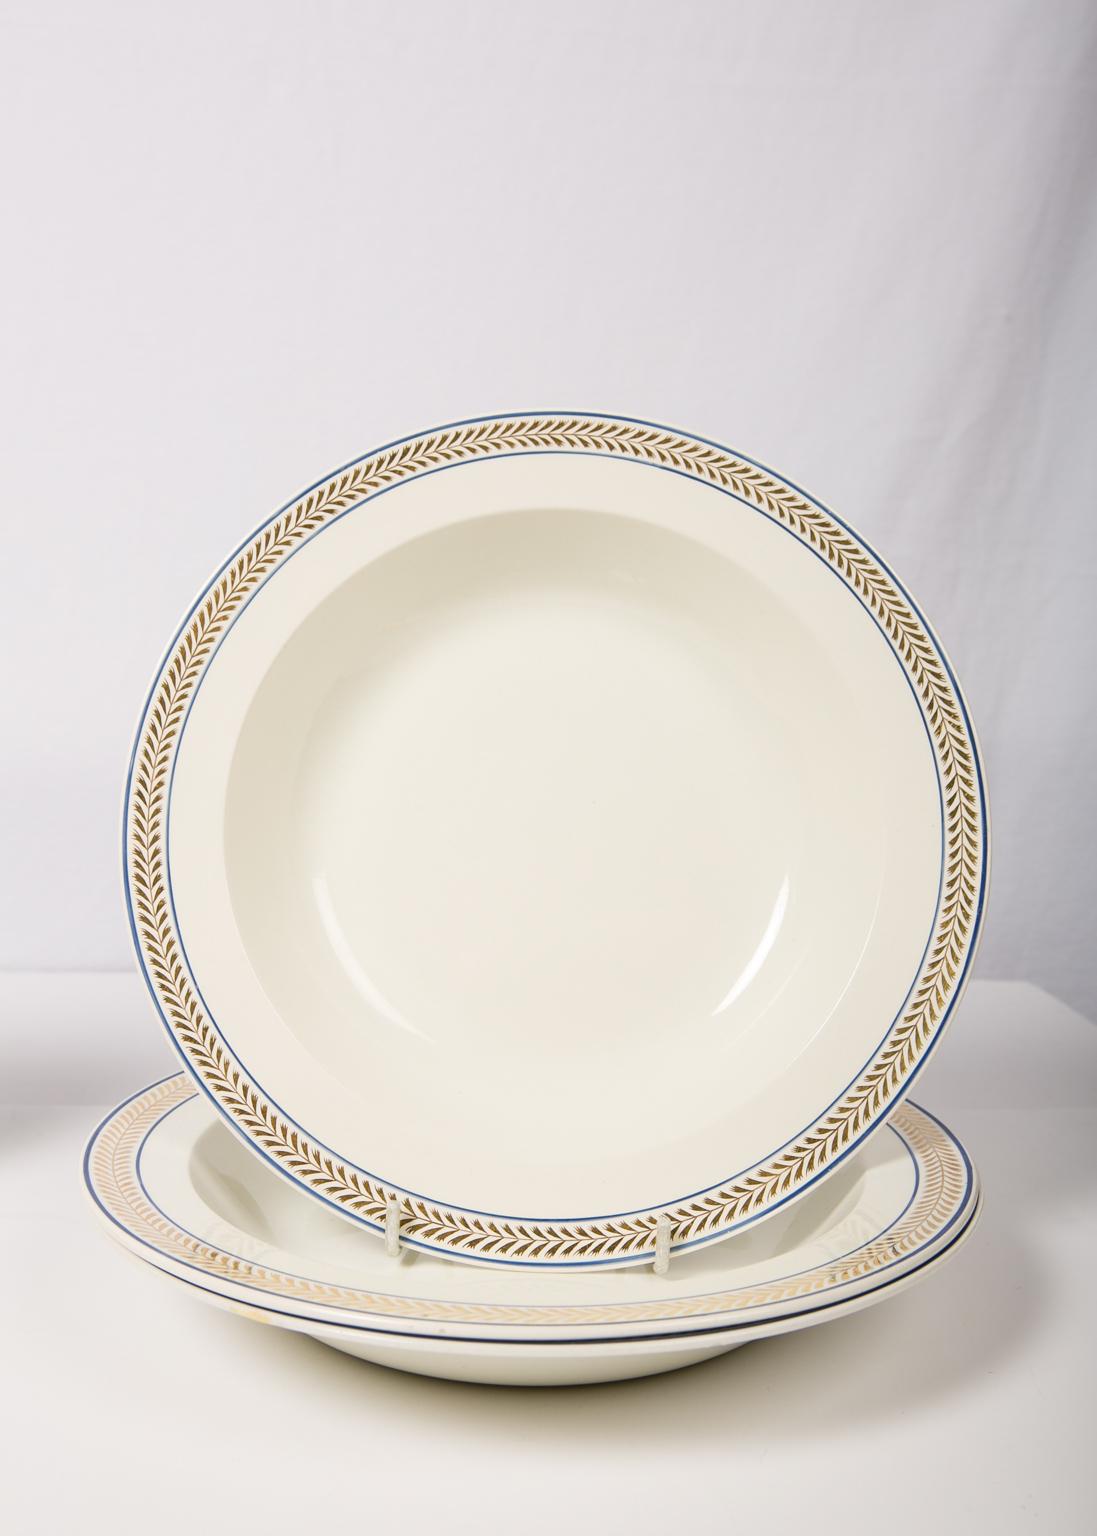 Wedgwood Antique Creamware Dinner Service with 57 Pieces England ca. 1820 8